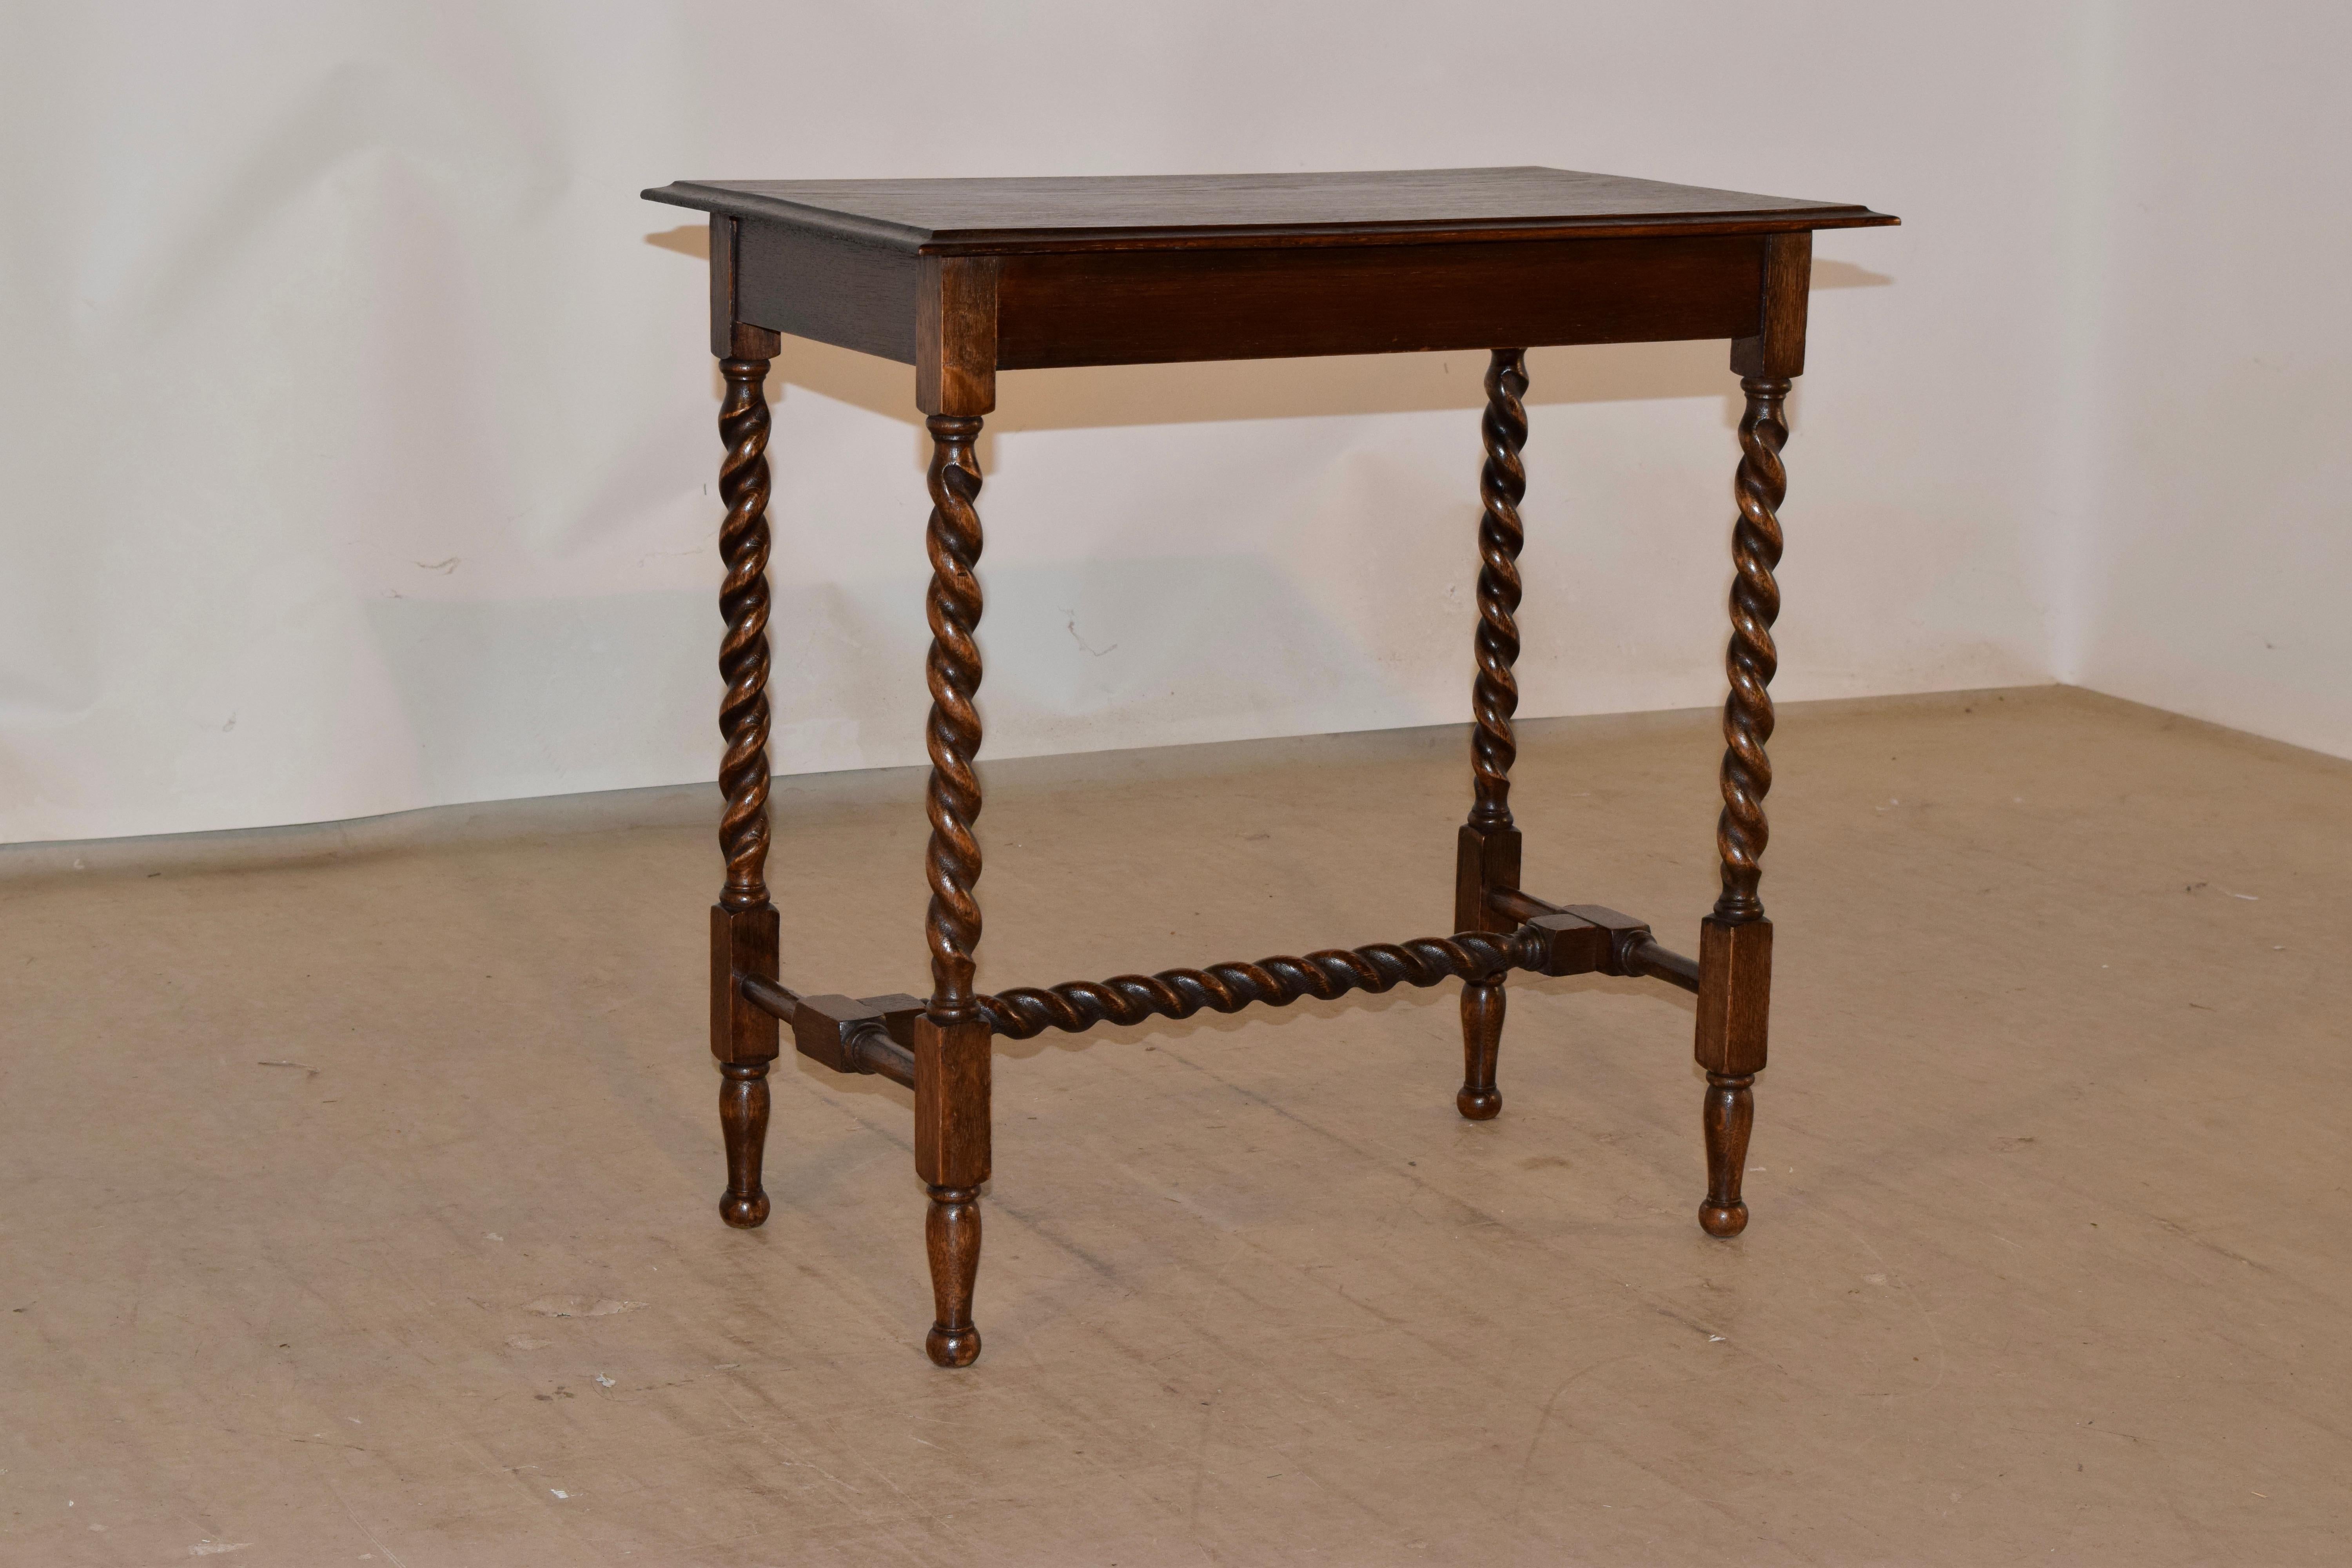 Circa 1900 oak side table from England. The top has a prominently beveled edge, following down to a simple apron and supported on hand turned barley twist legs, joined by turned stretchers and a matching barley twist cross stretcher. The feet are